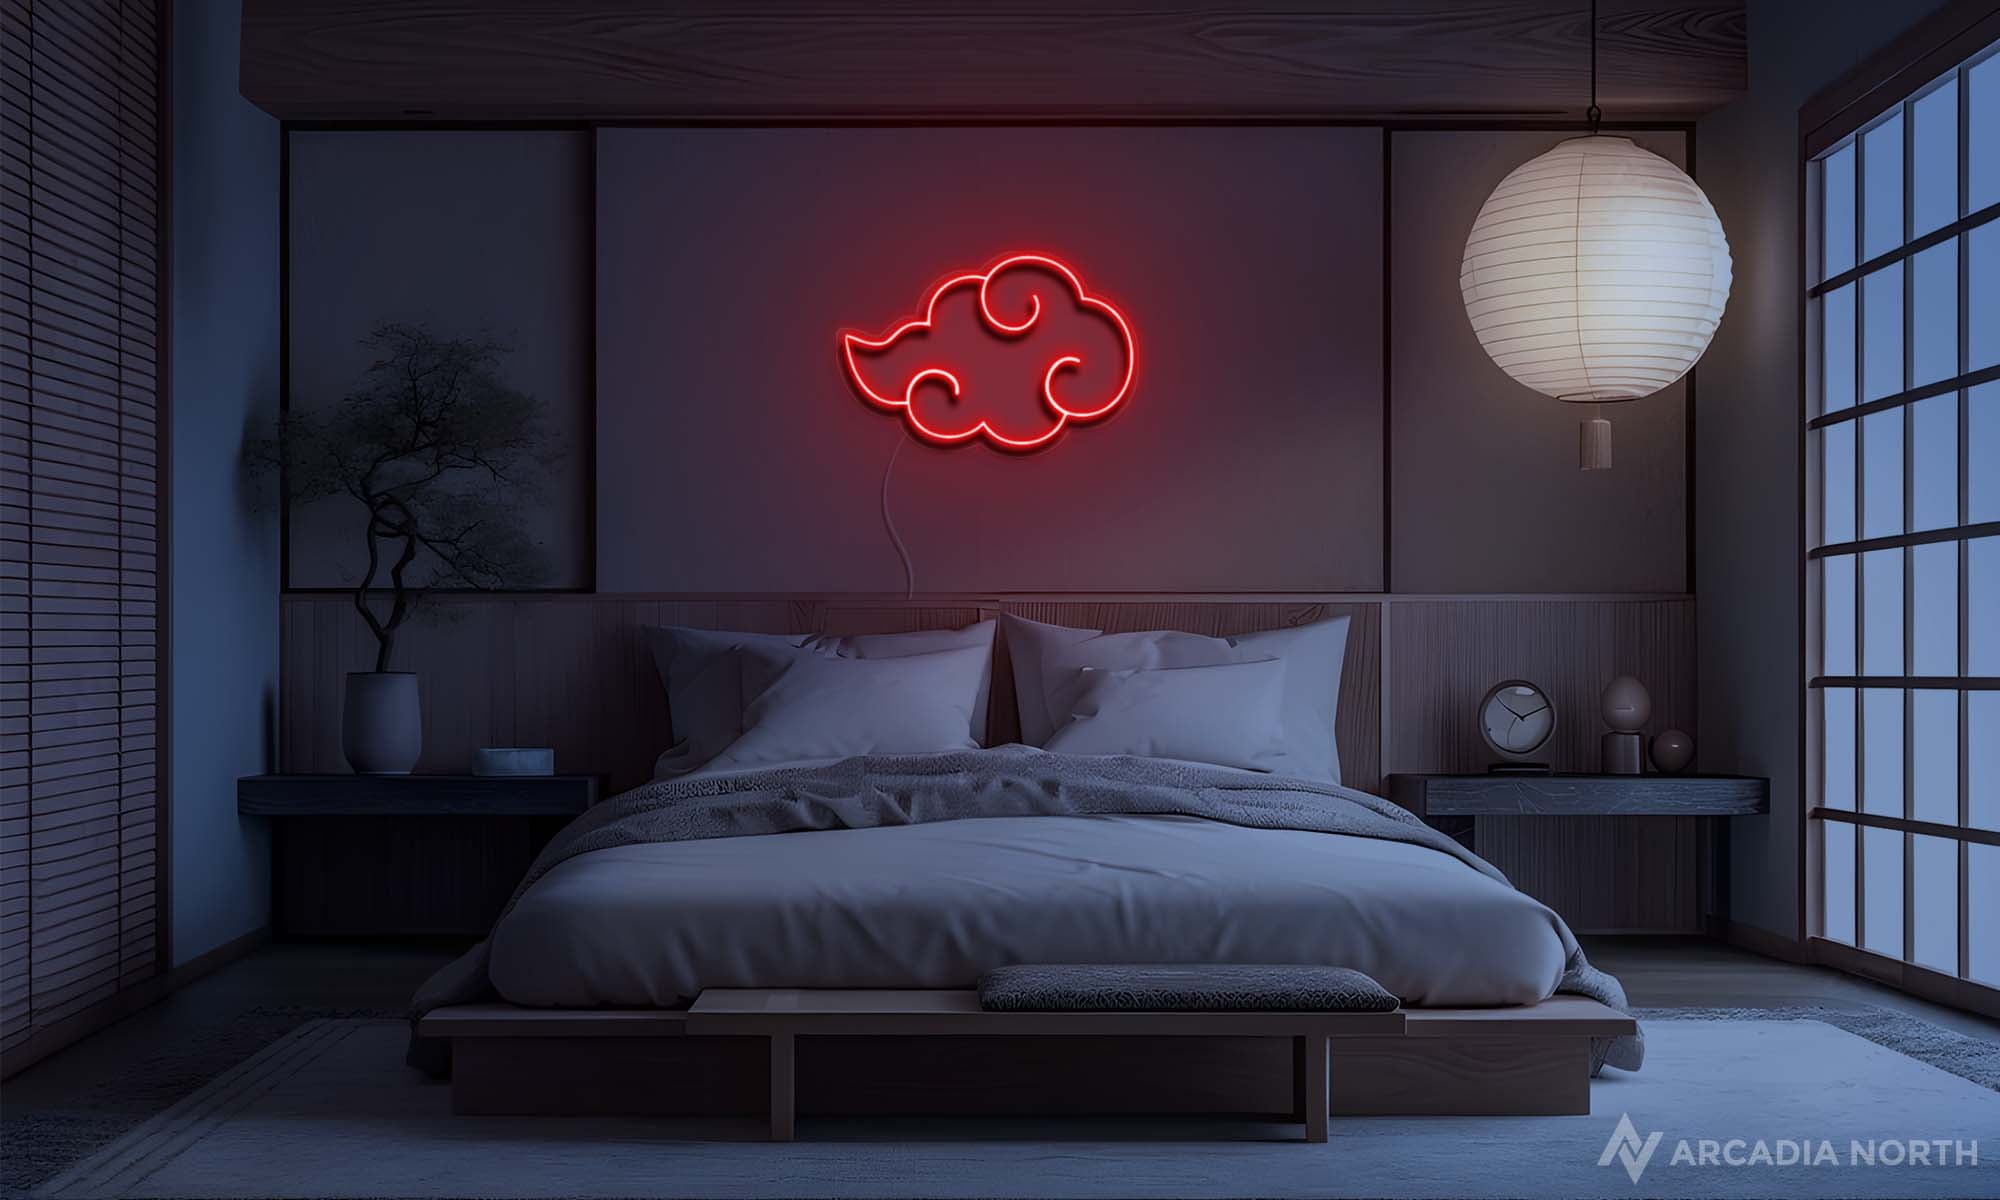 Modern Japanese style bedroom with a red Naruto Akatsuki cloud neon sign on the wall above a bed